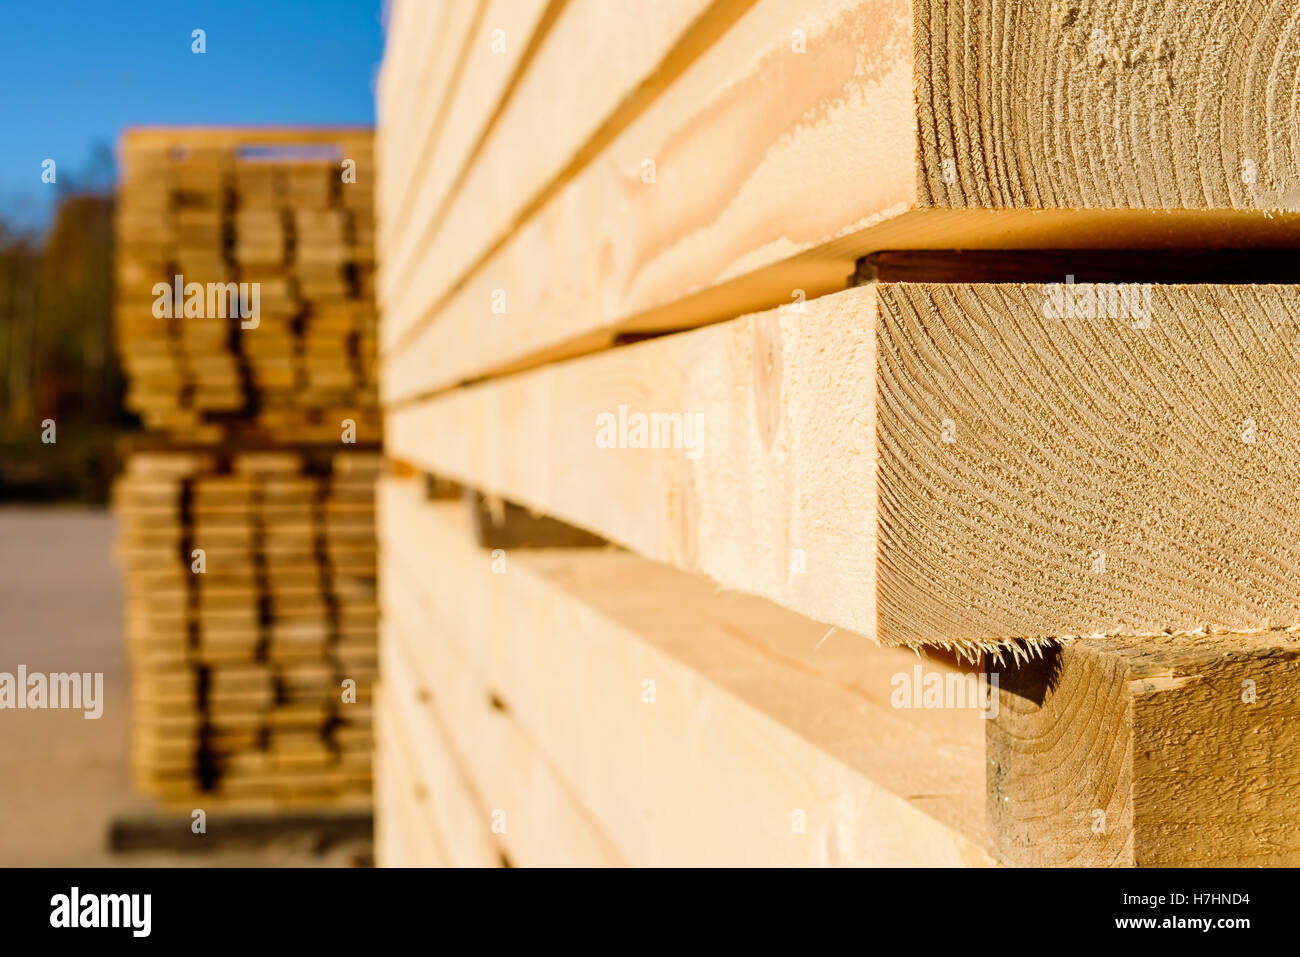 Corner parts of stacked lumber or timber. Stock Photo